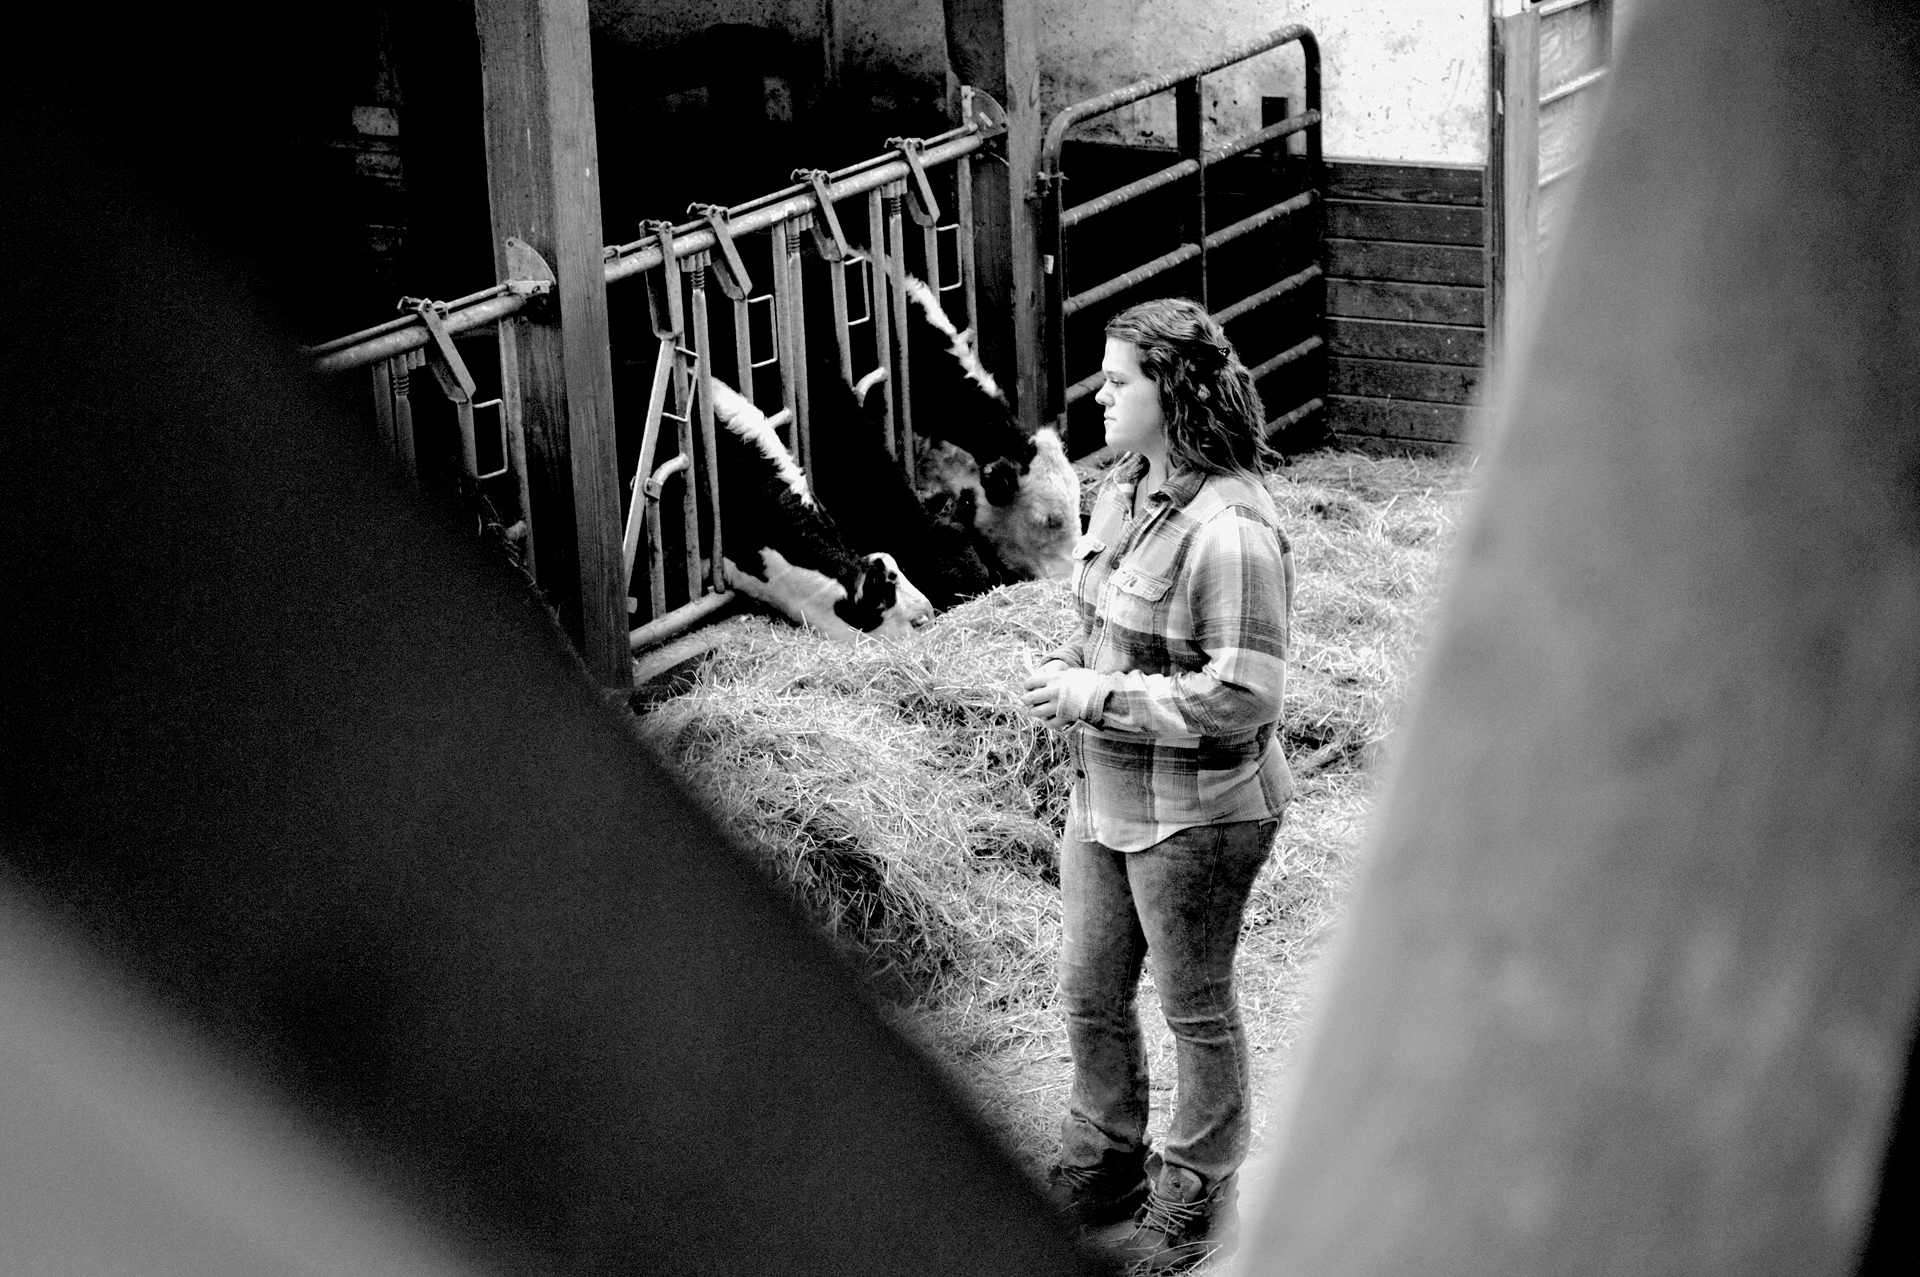 Watching Over Her Cattle